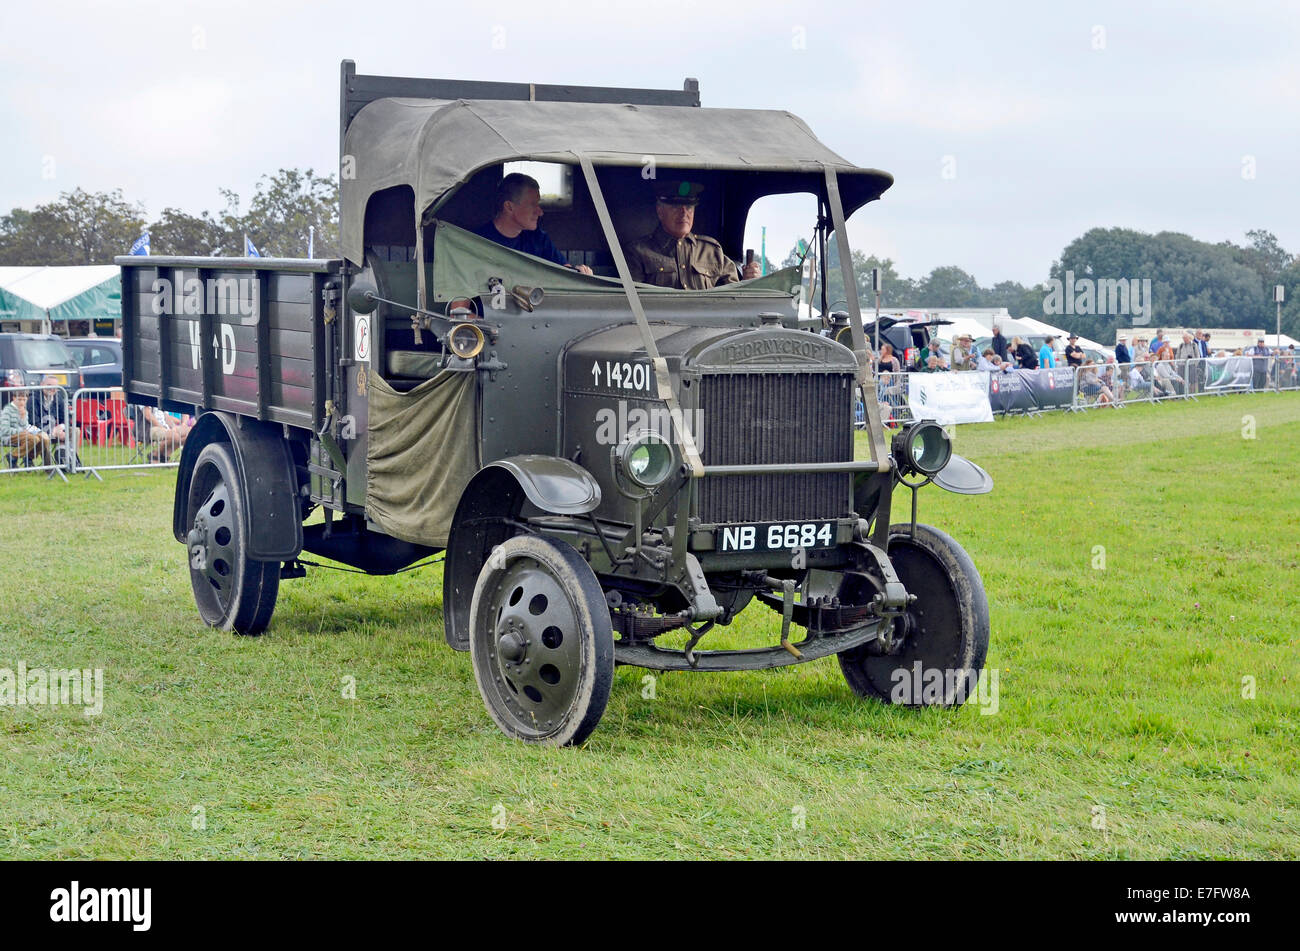 A Thornycroft J type lorry used by the British Army in WW1. Restored and owned by Hampshire Museums Service. Stock Photo